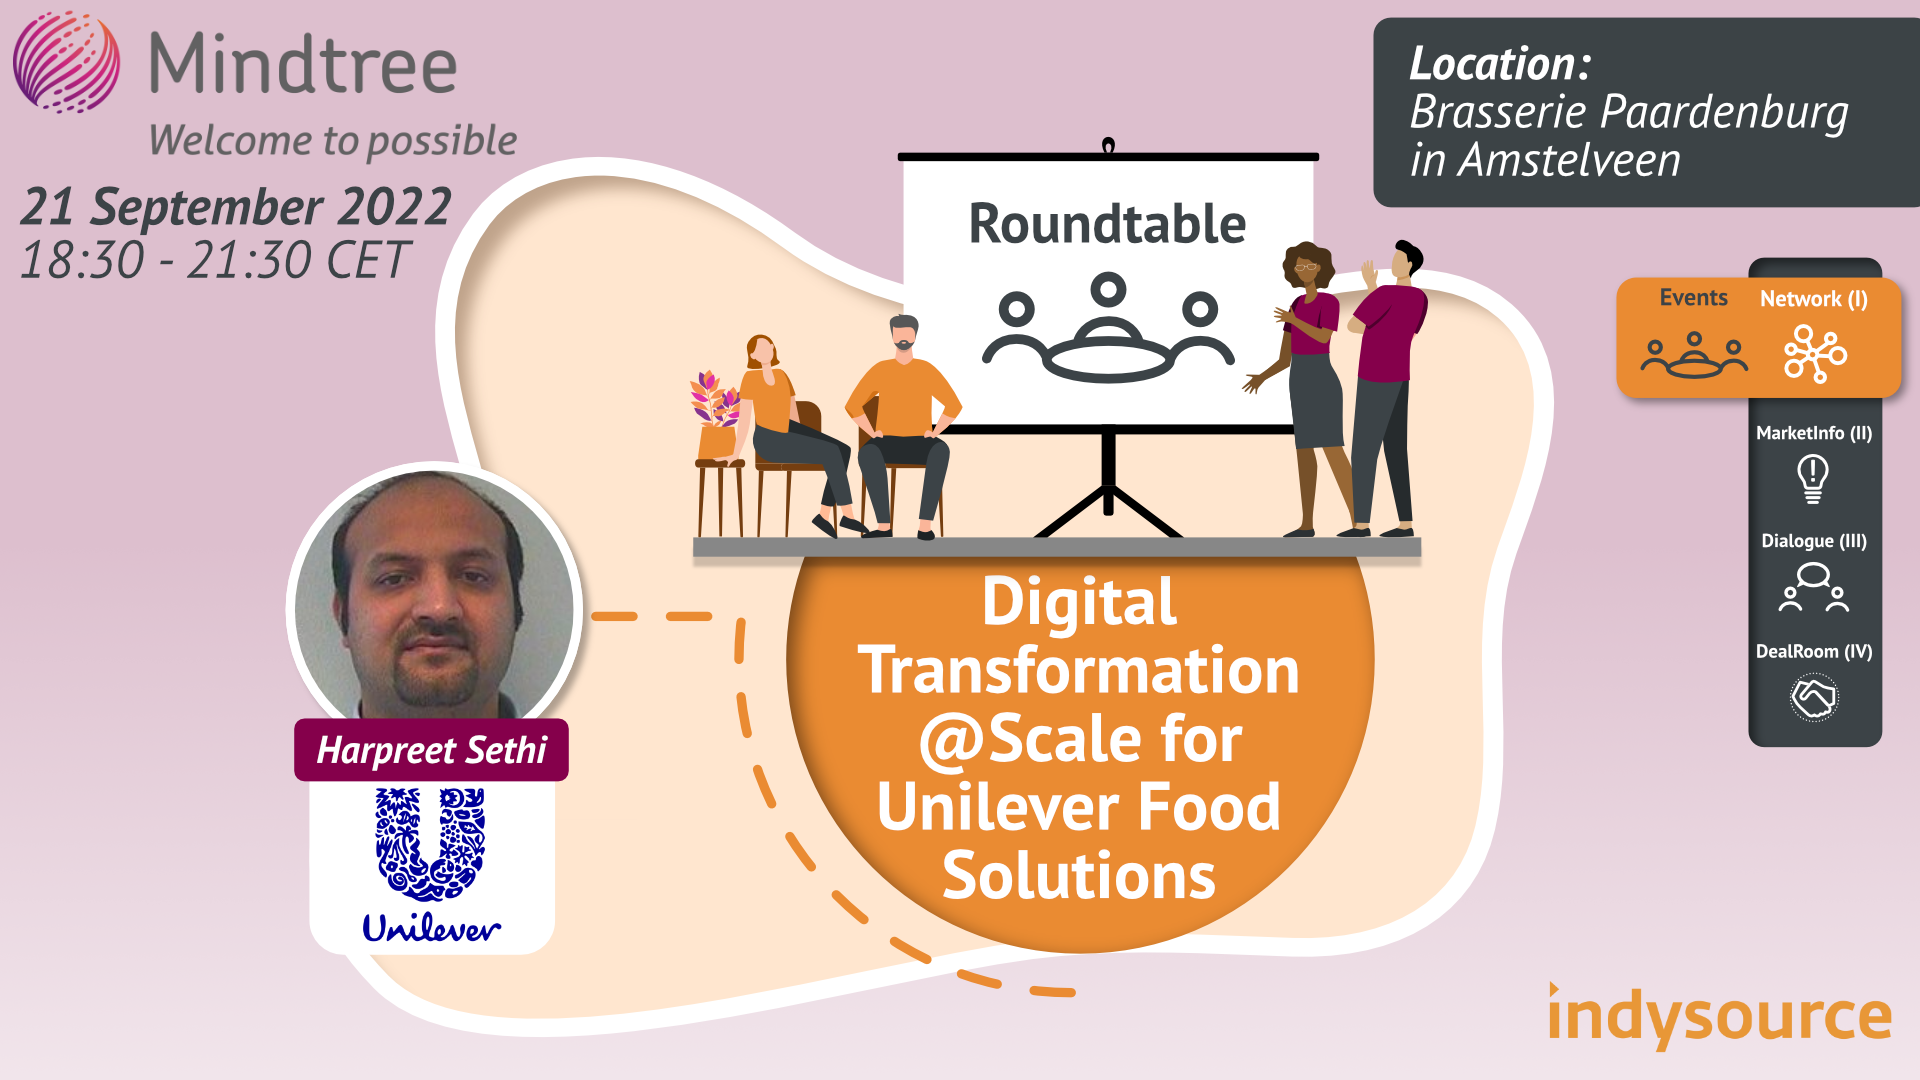 Mindtree Digital Transformation @Scale for Unilever Food Solutions